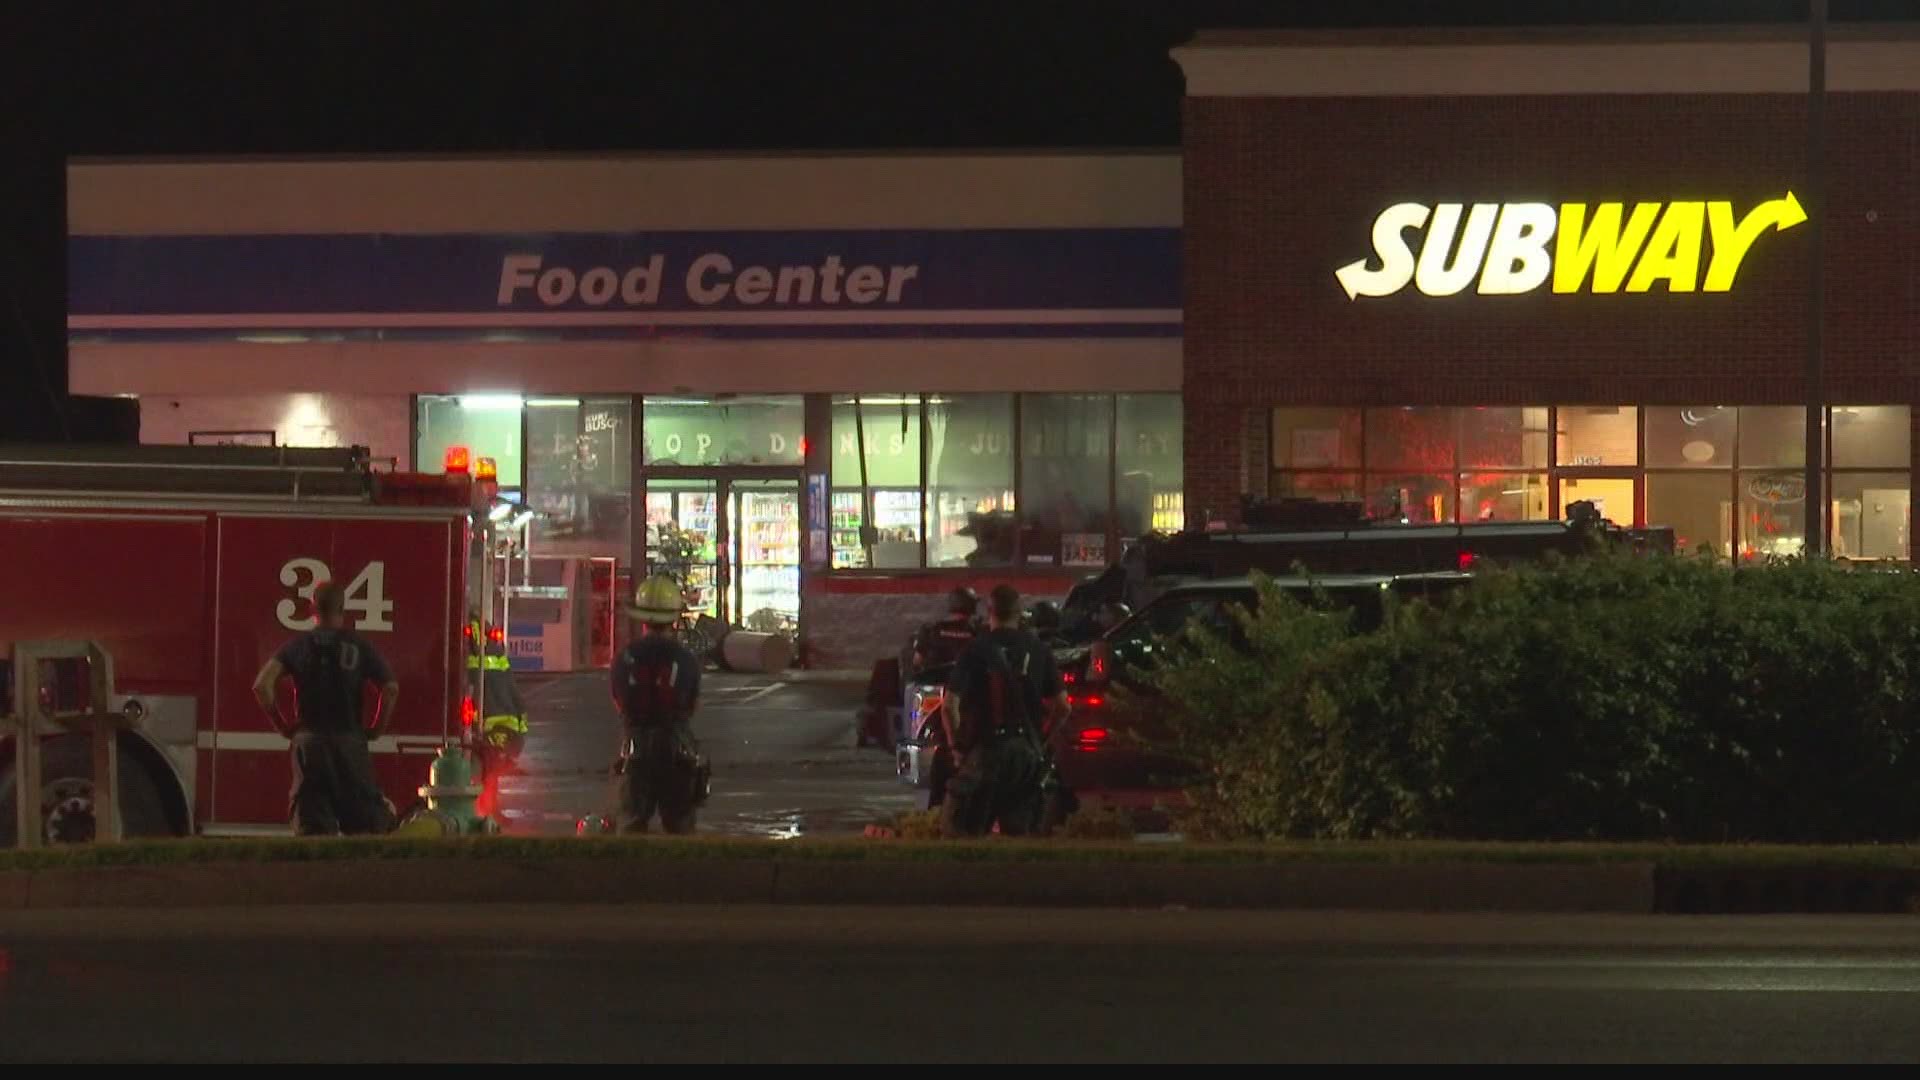 A man fired a rifle into a south side convenience store then set it on fire, according to witnesses.